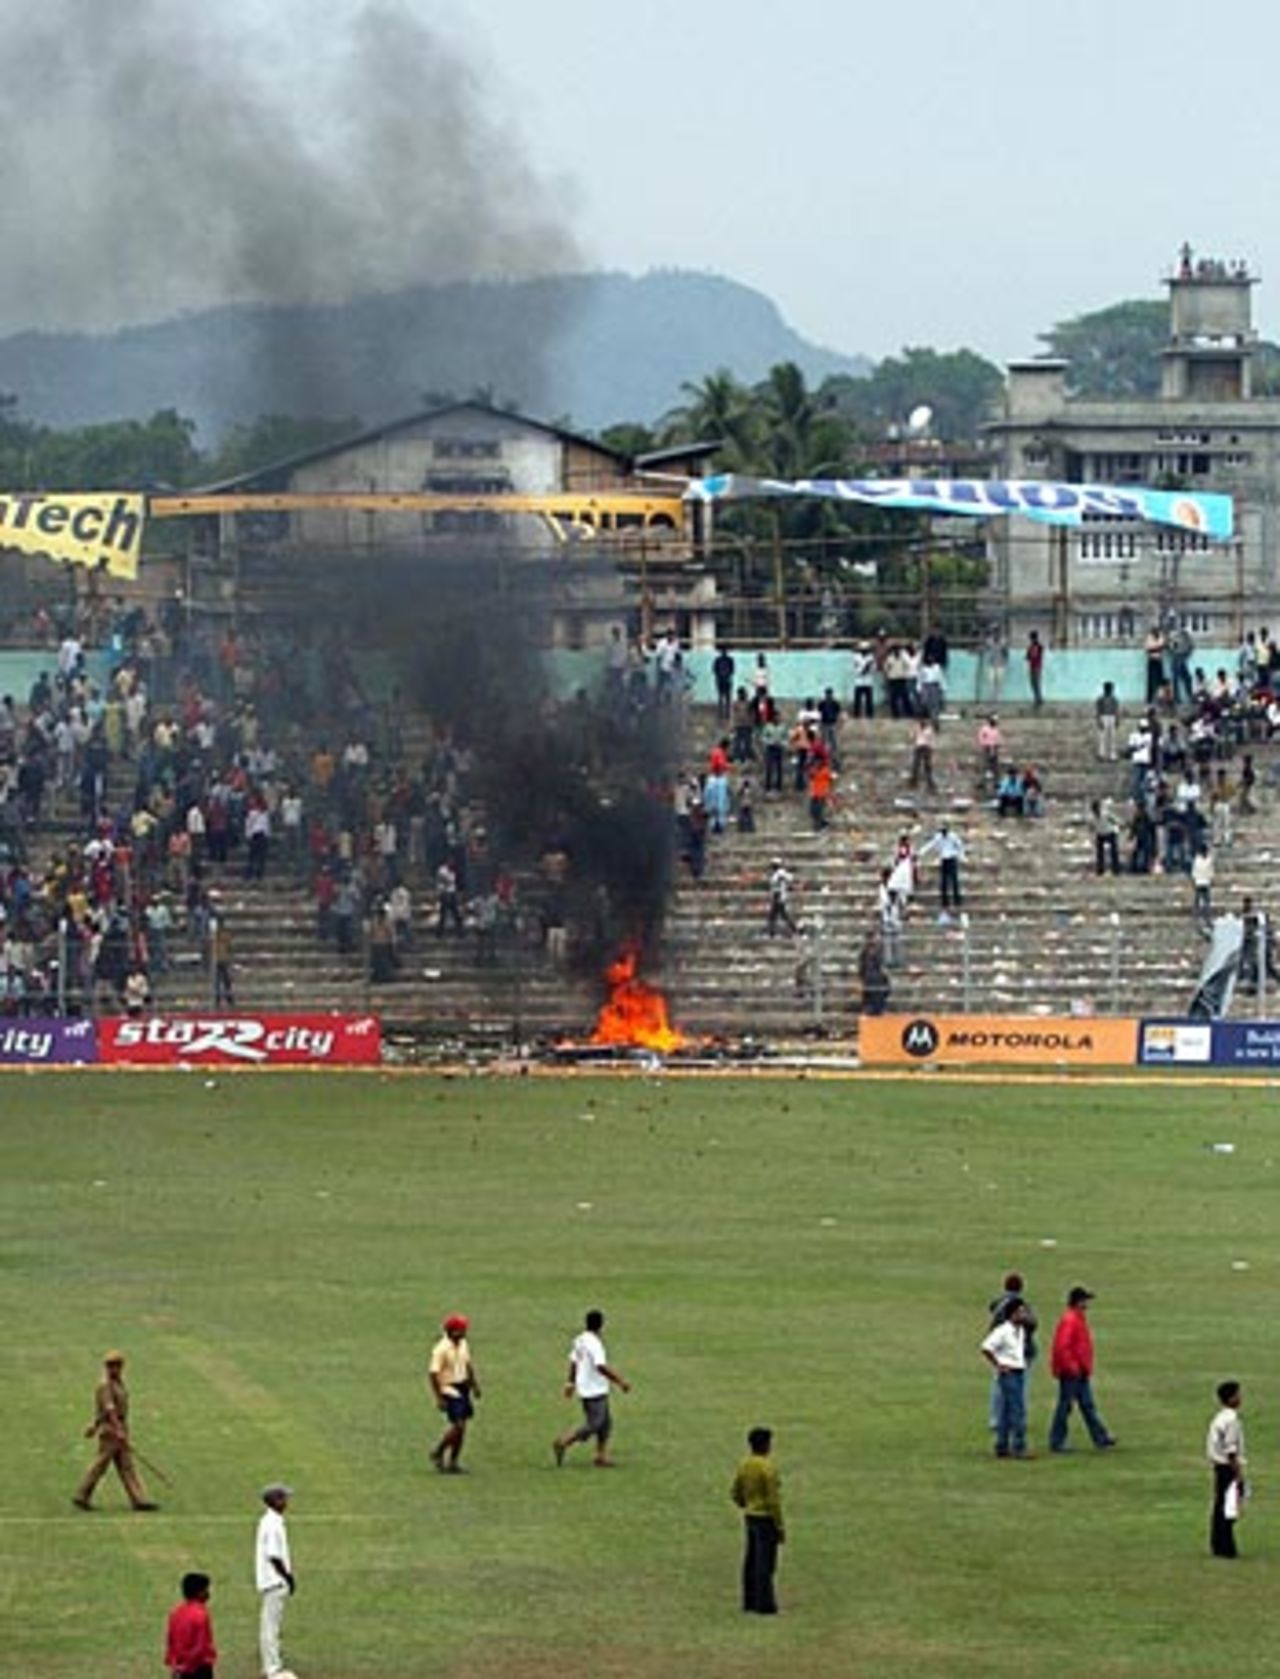 Fires burn in the stands after the game was abandoned, India v England, 5th ODI, Guwahati,  April 9, 2006